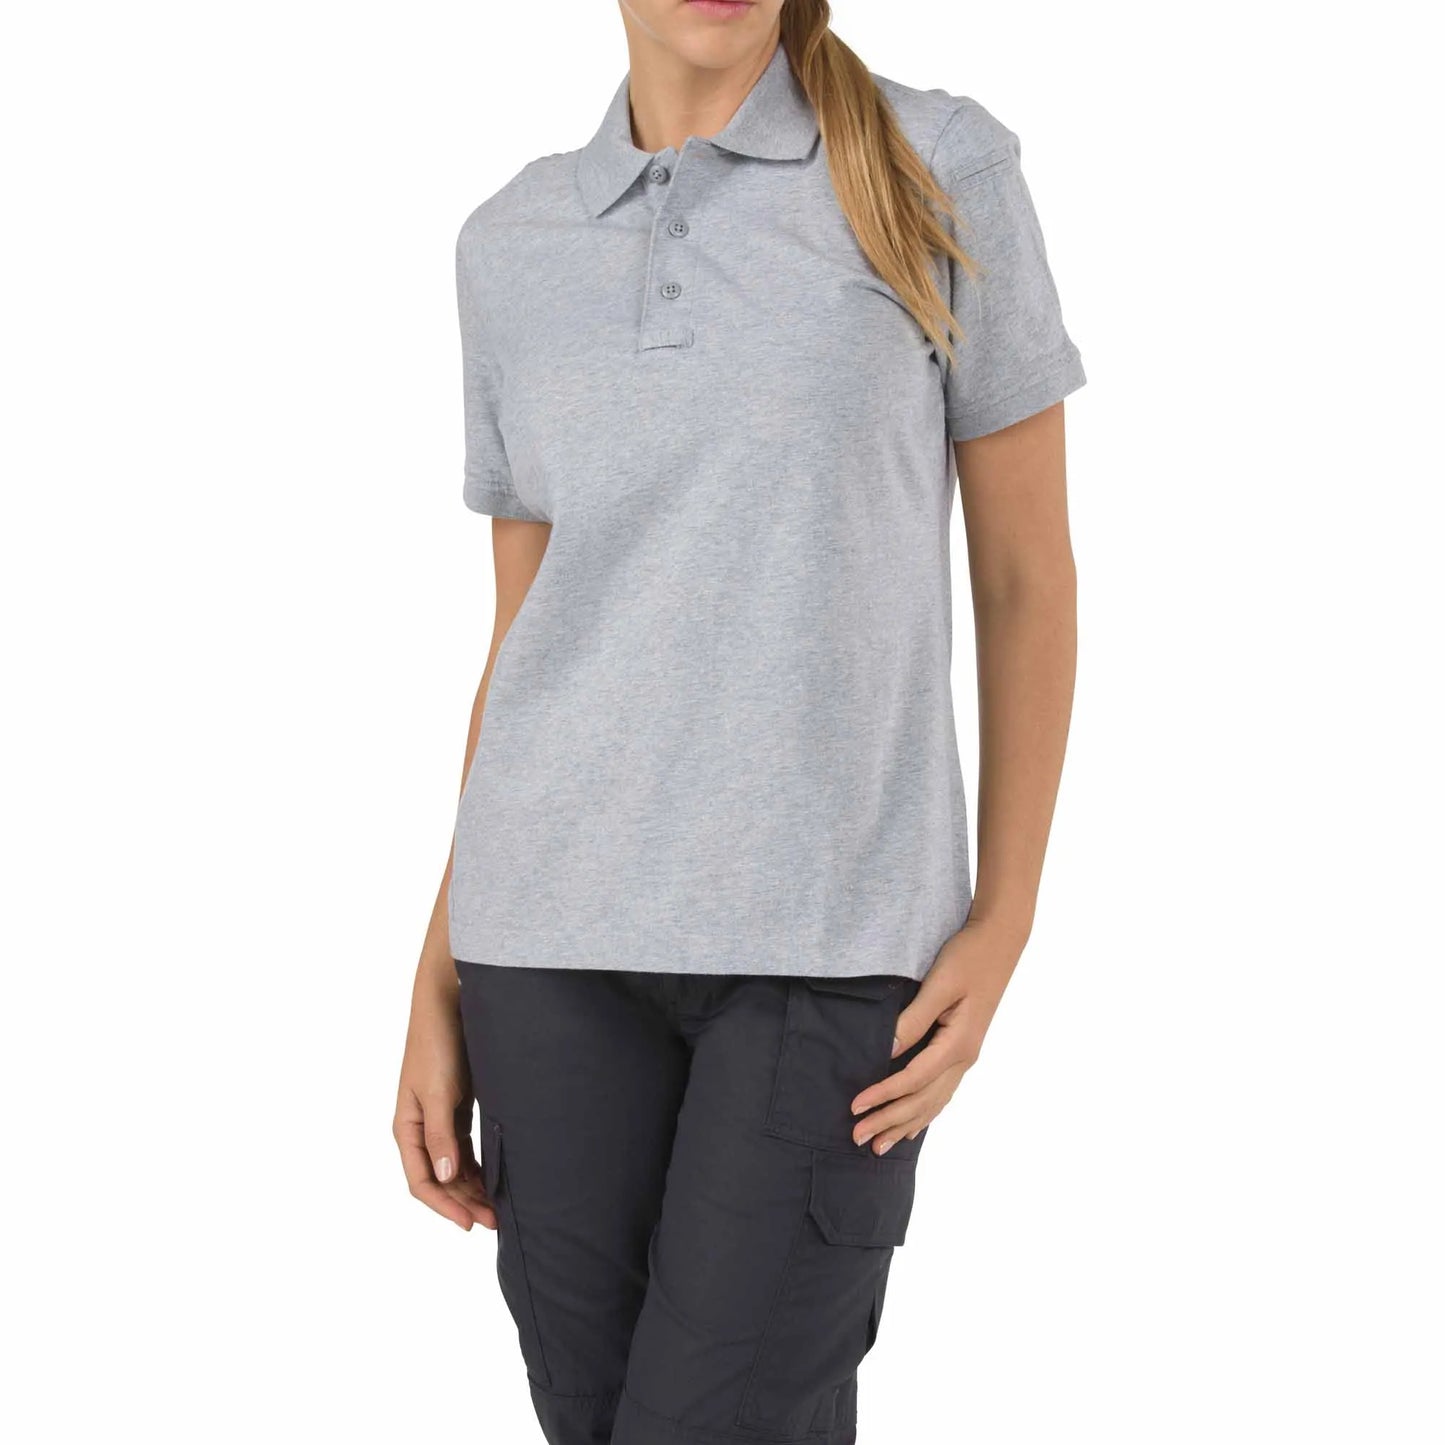 5.11 Tactical Women’s Tactical Jersey Short Sleeve Polo